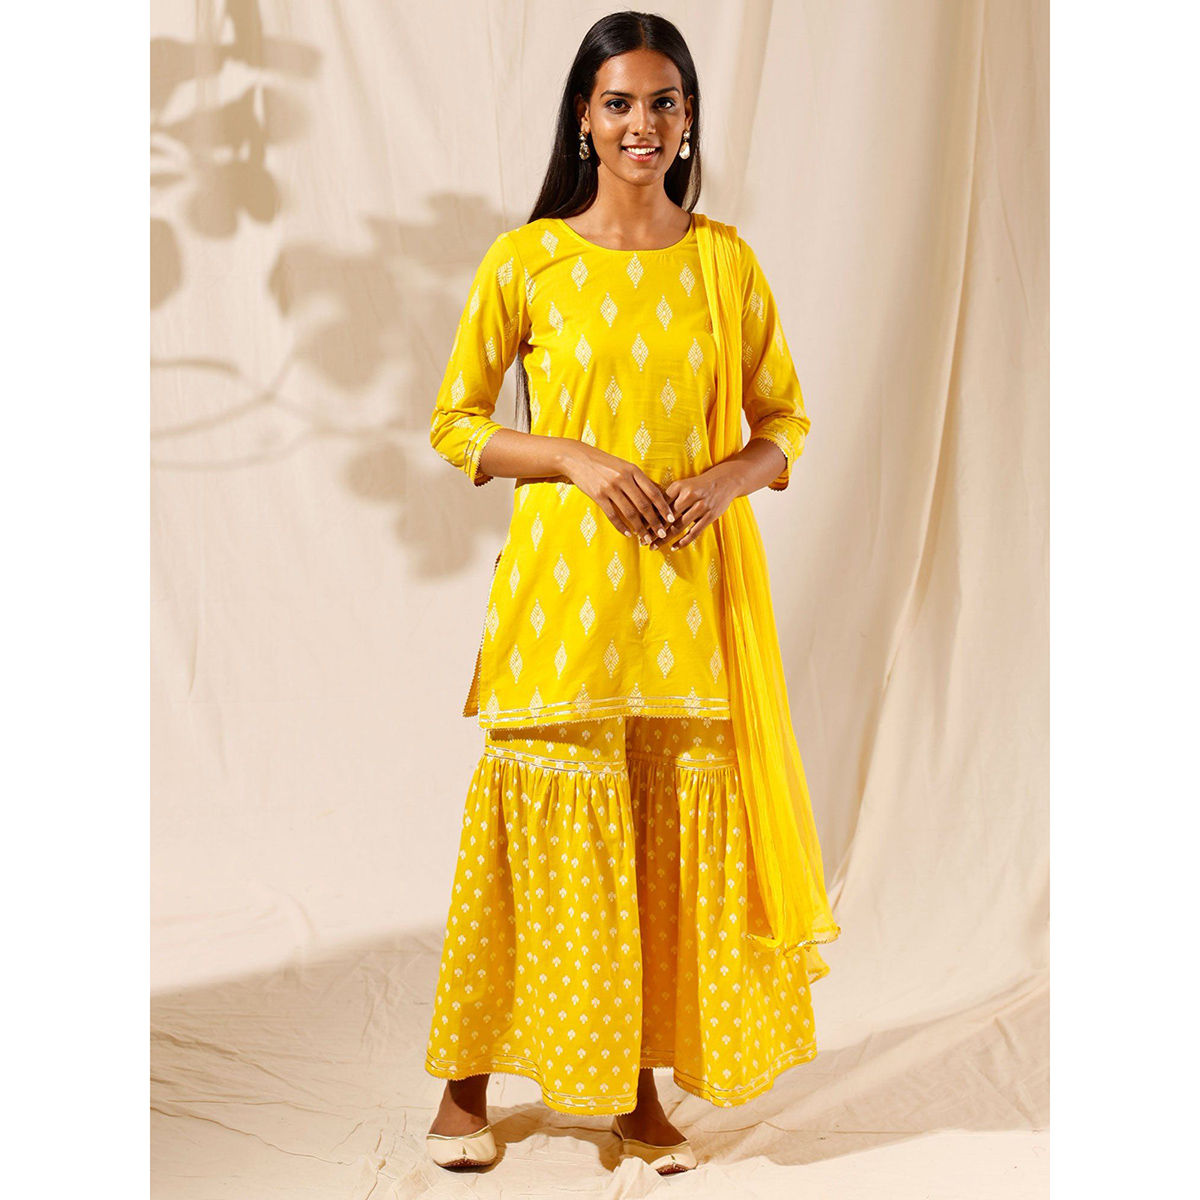 Discover more than 239 yellow gharara suit latest